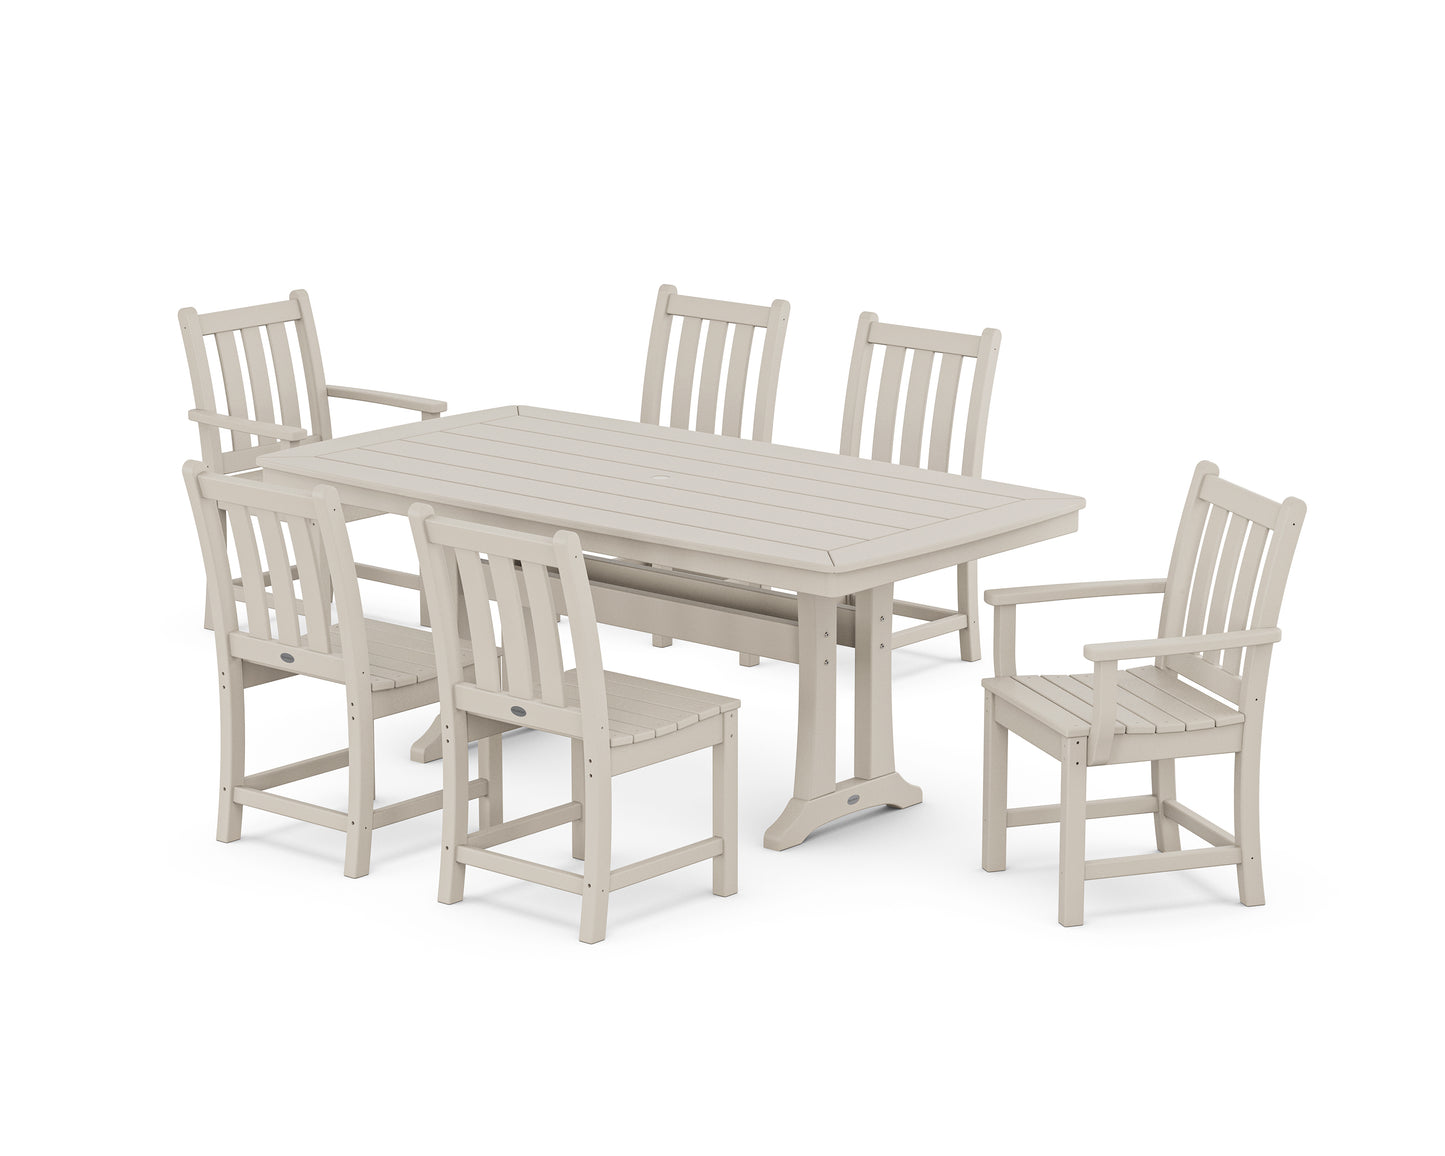 Traditional Garden 7-Piece Dining Set with Trestle Legs